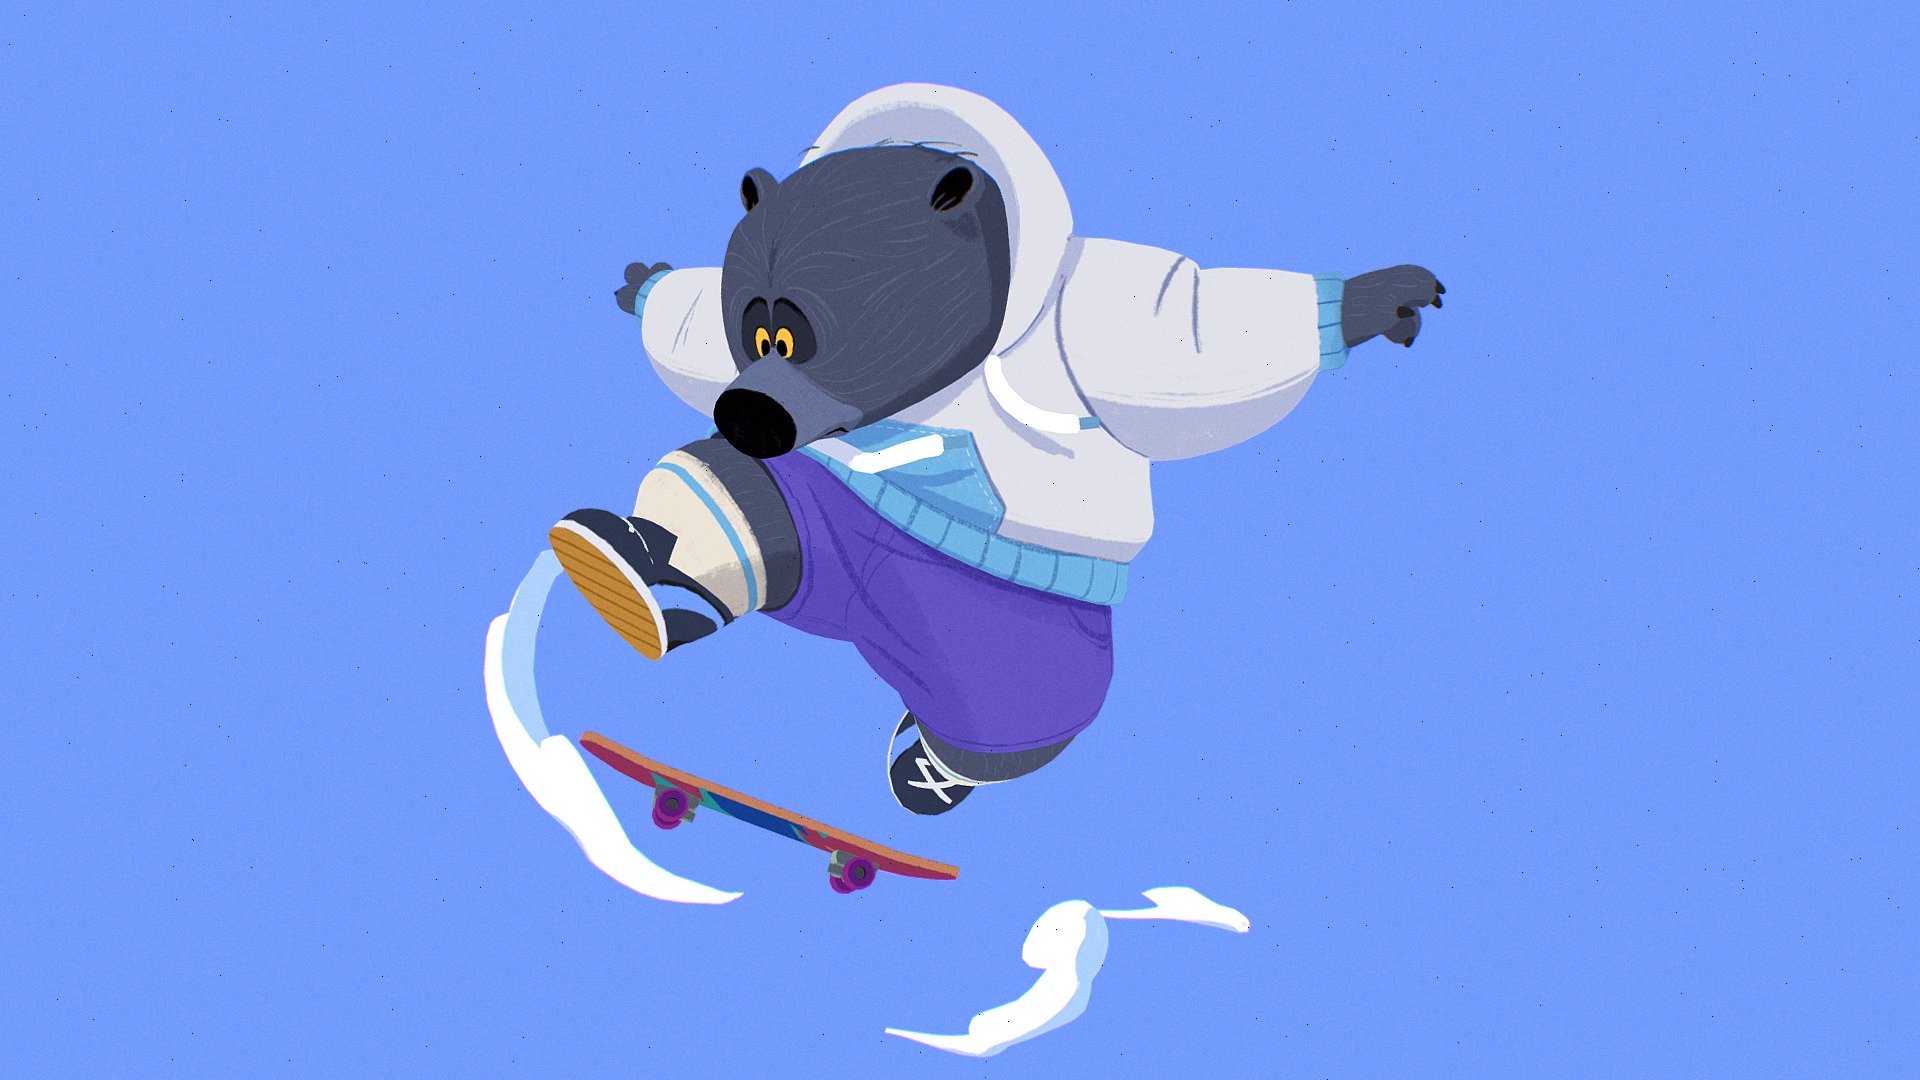 🐻🛹 Introducing my latest project: a skateboarding bear in 3D, inspired by the original concept of Seung Uk Hong!(https://www.behance.net/tmddnr01020a8c) Loved diving into this stylized artwork and bringing this unique character to life. 

Hope you all enjoy it! - Skater Bear - 3D model by Fabricio Campos (@fcampos) 3d model